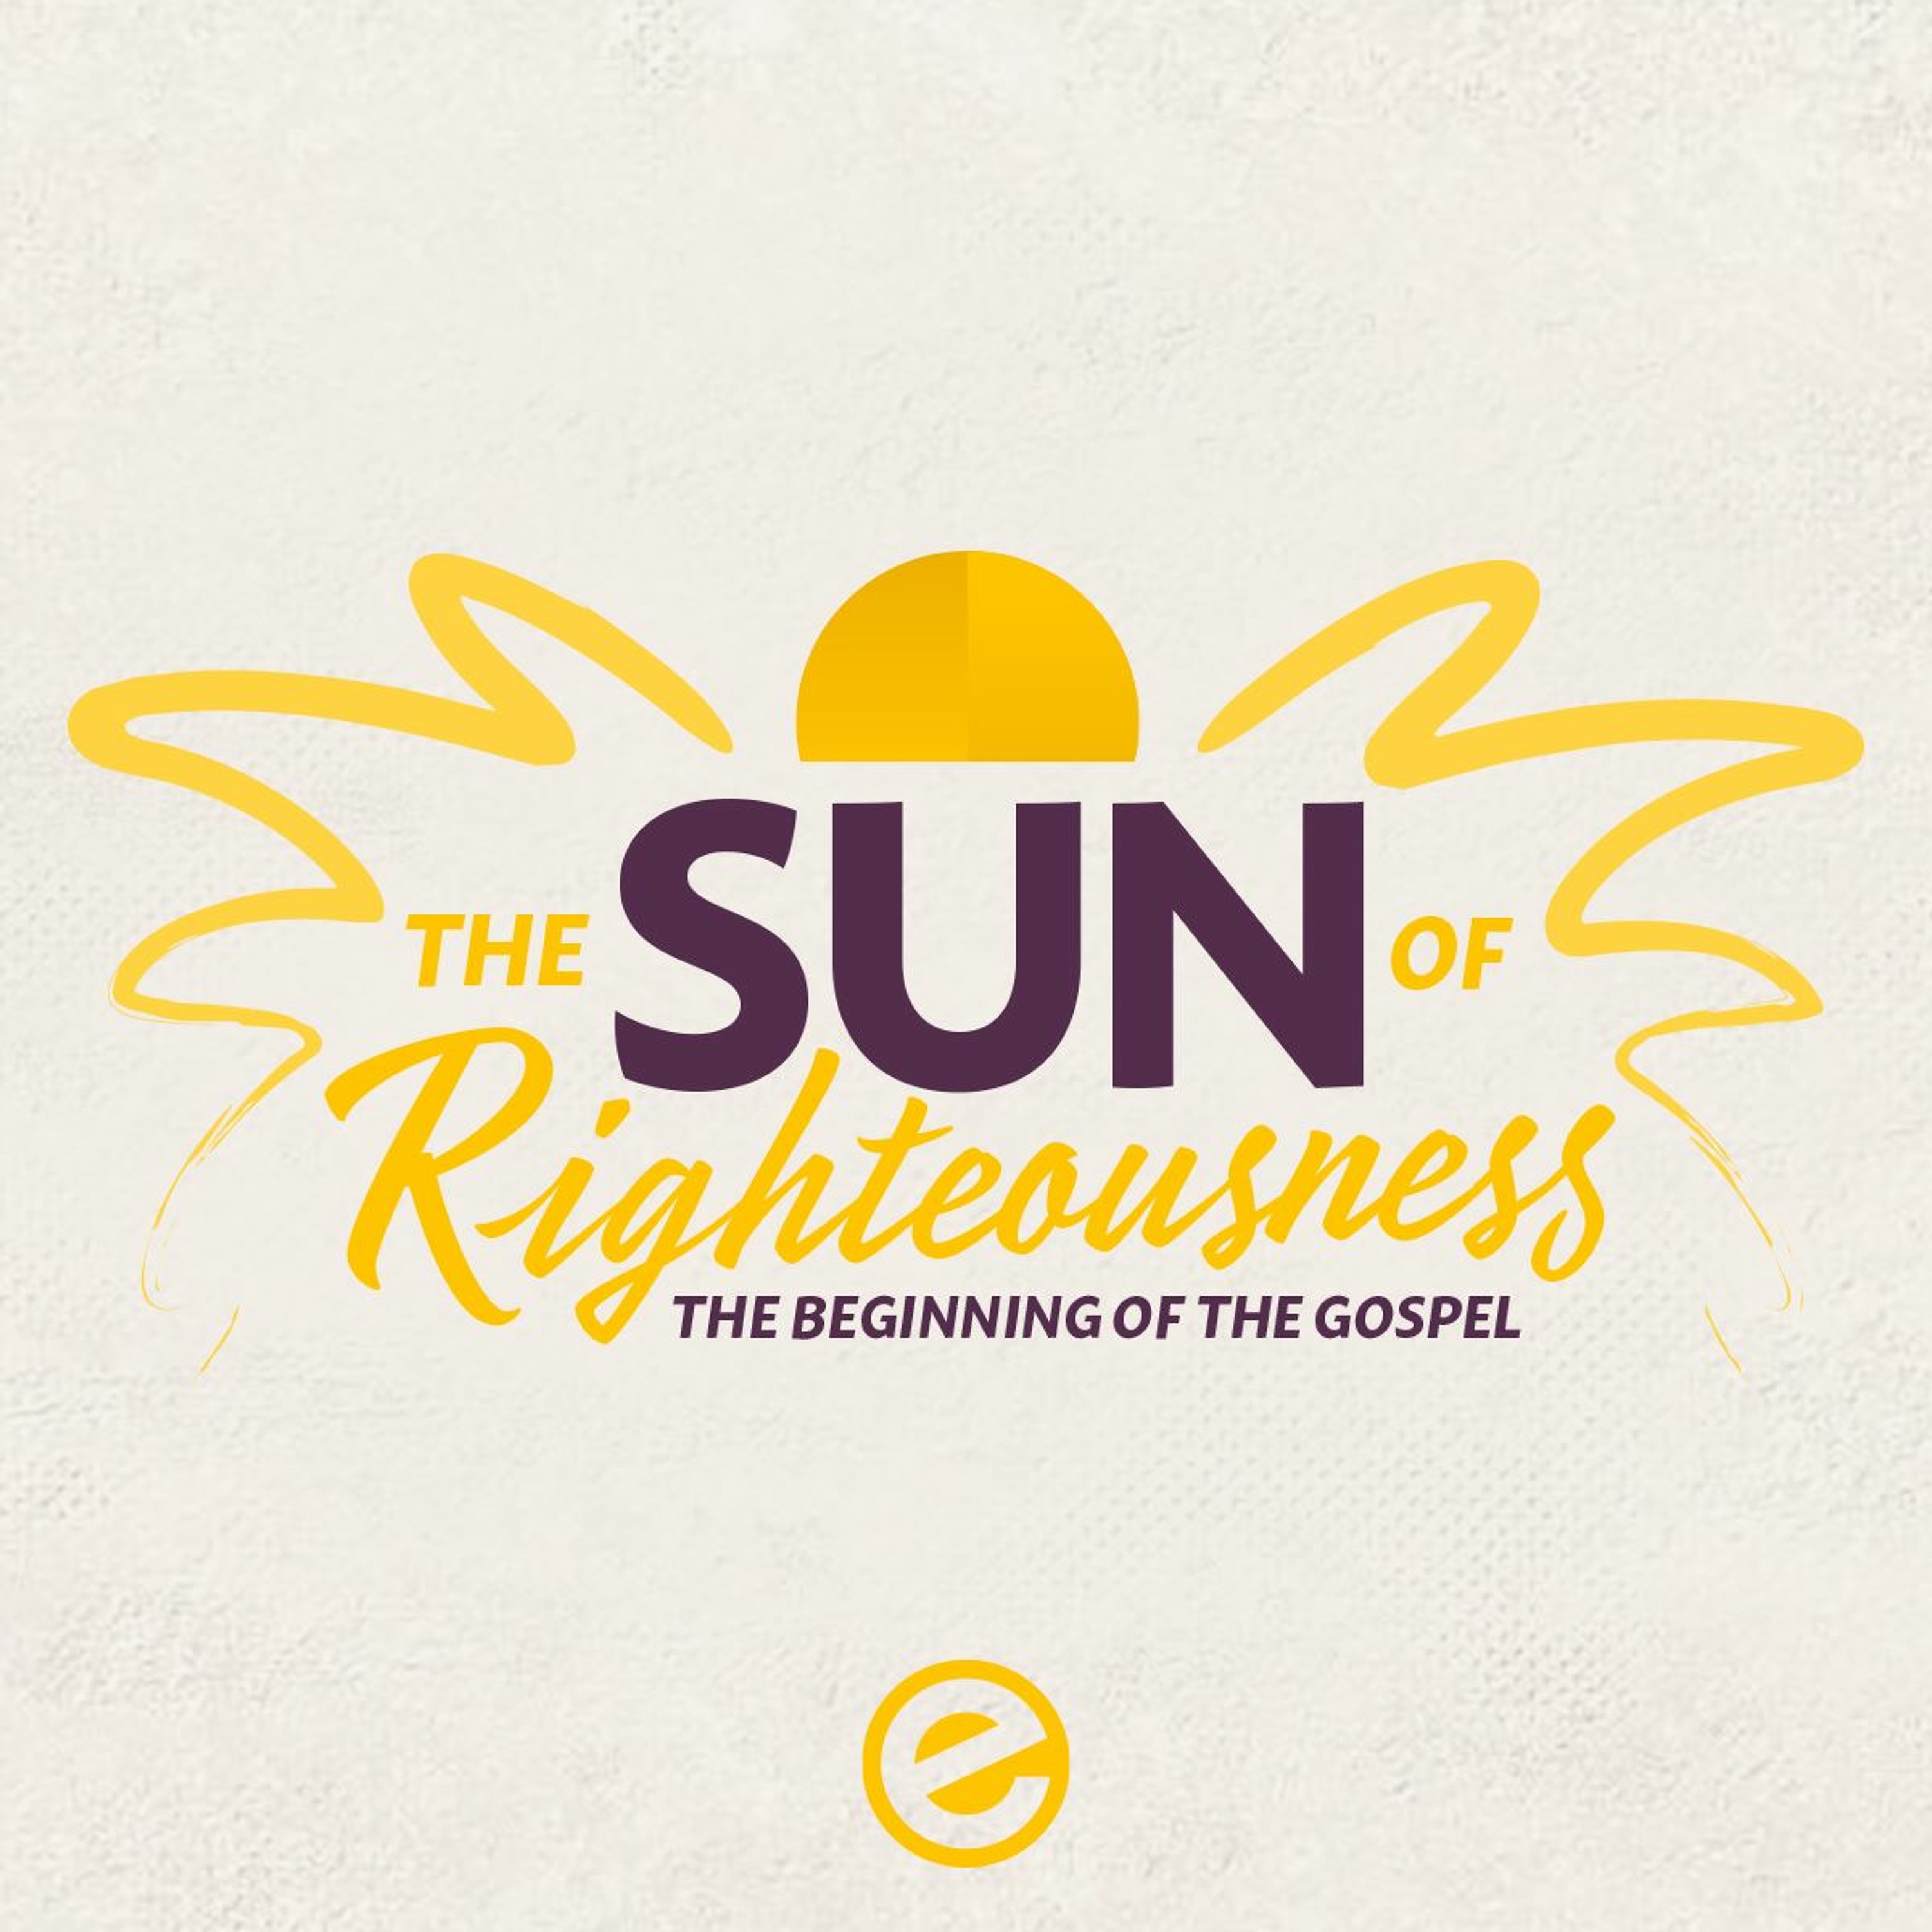 Sun of Righteousness | Week 3: Jesus is the Son of Man